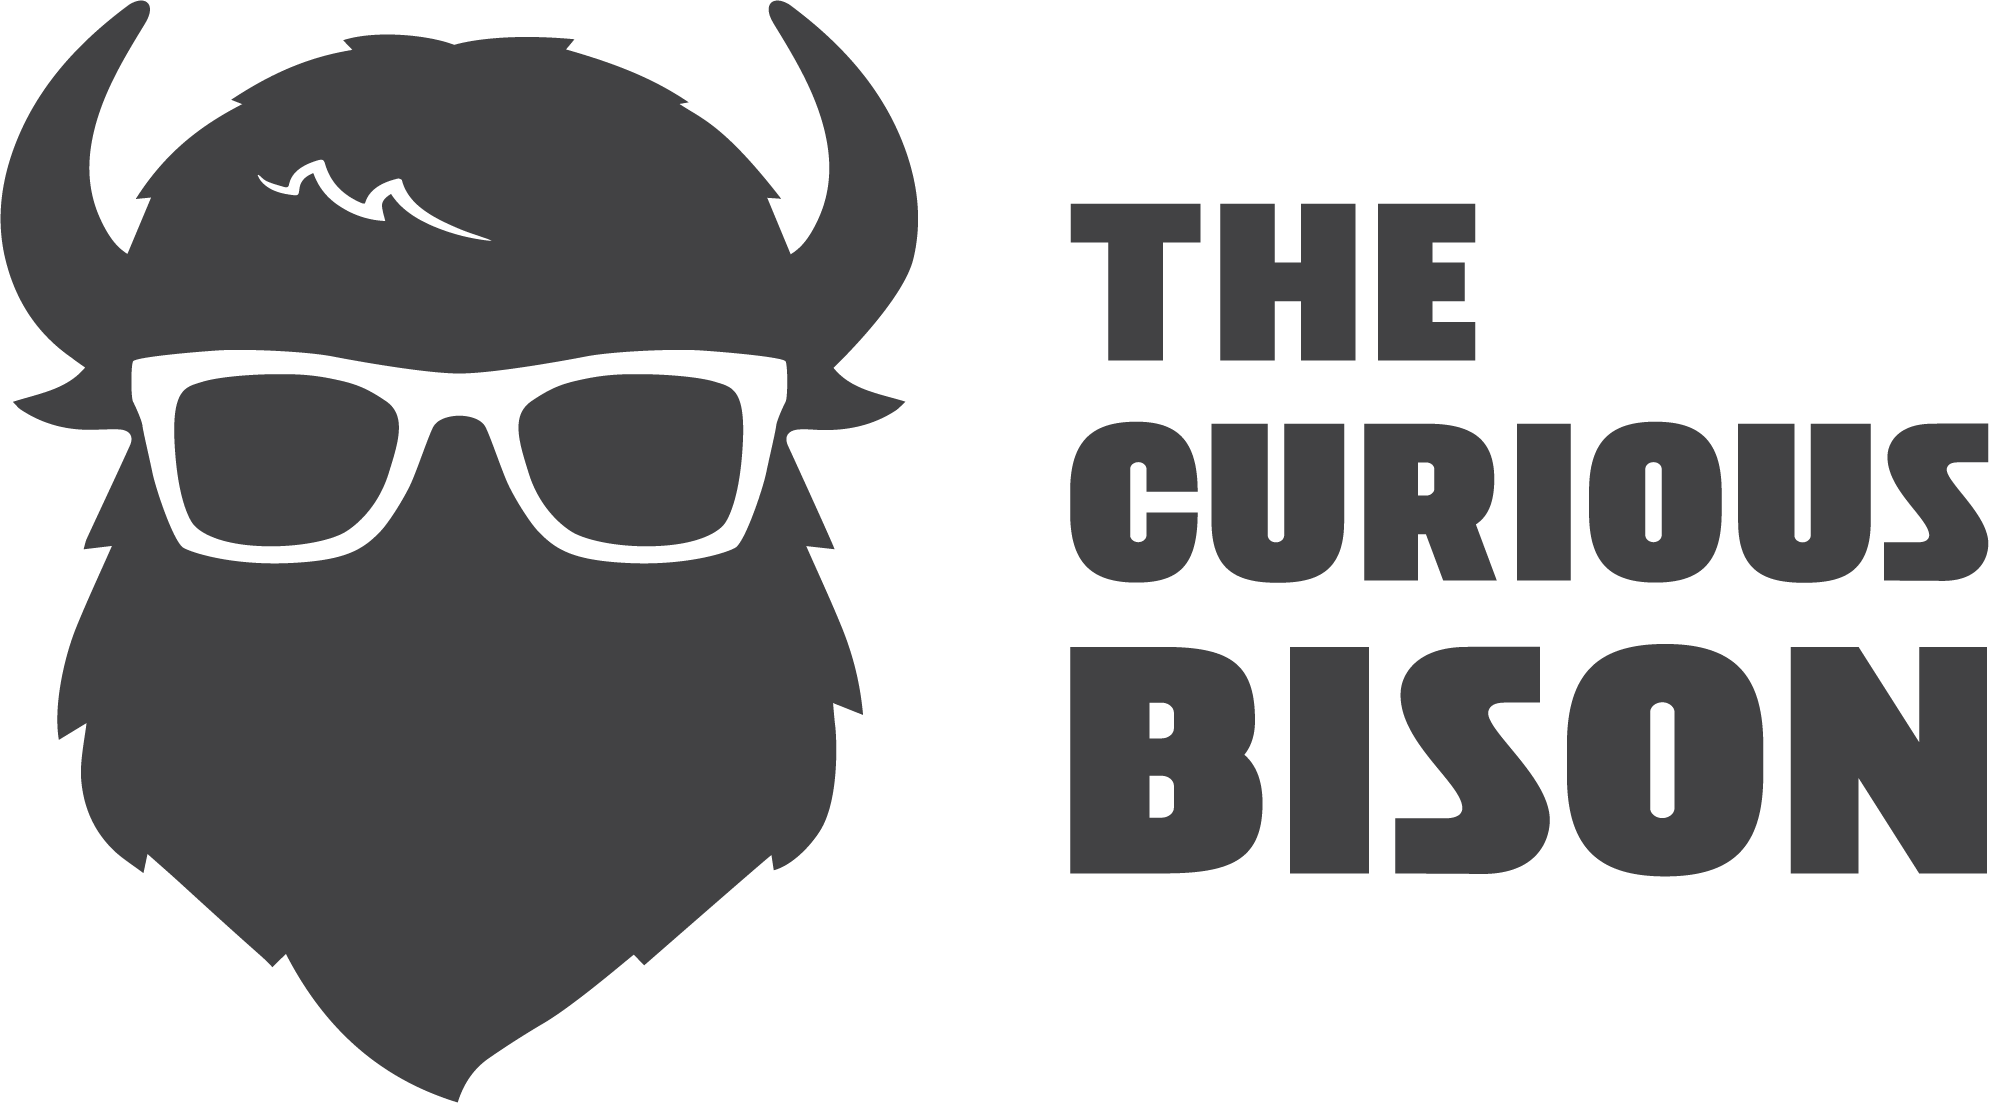 The Curious Bison